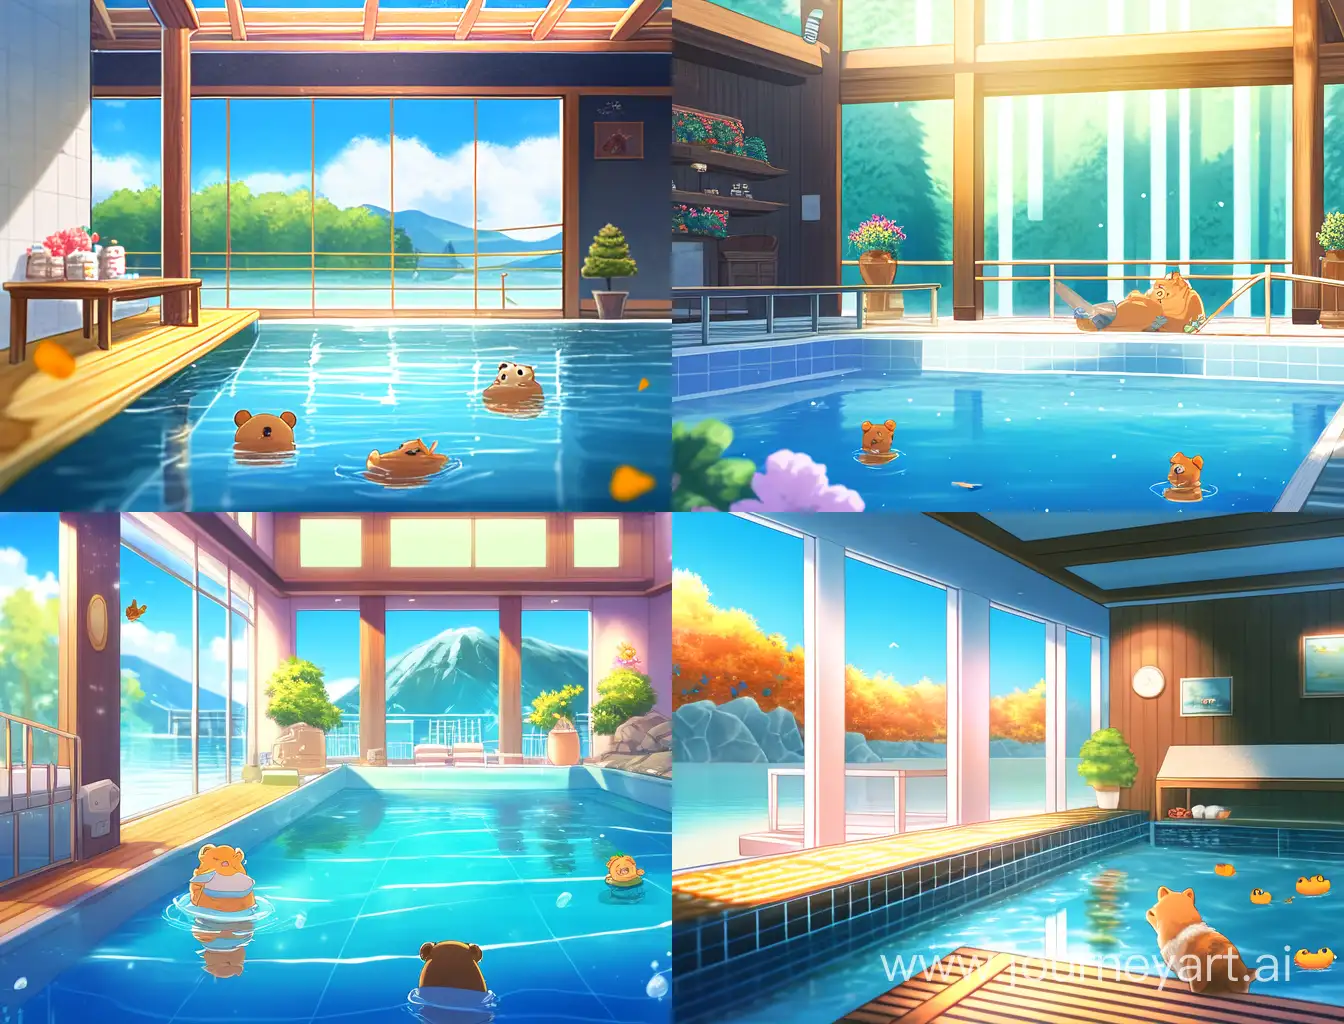 Bear-Family-Swimming-in-NatureView-Pool-Sauna-with-Floating-Mandarin-Oranges